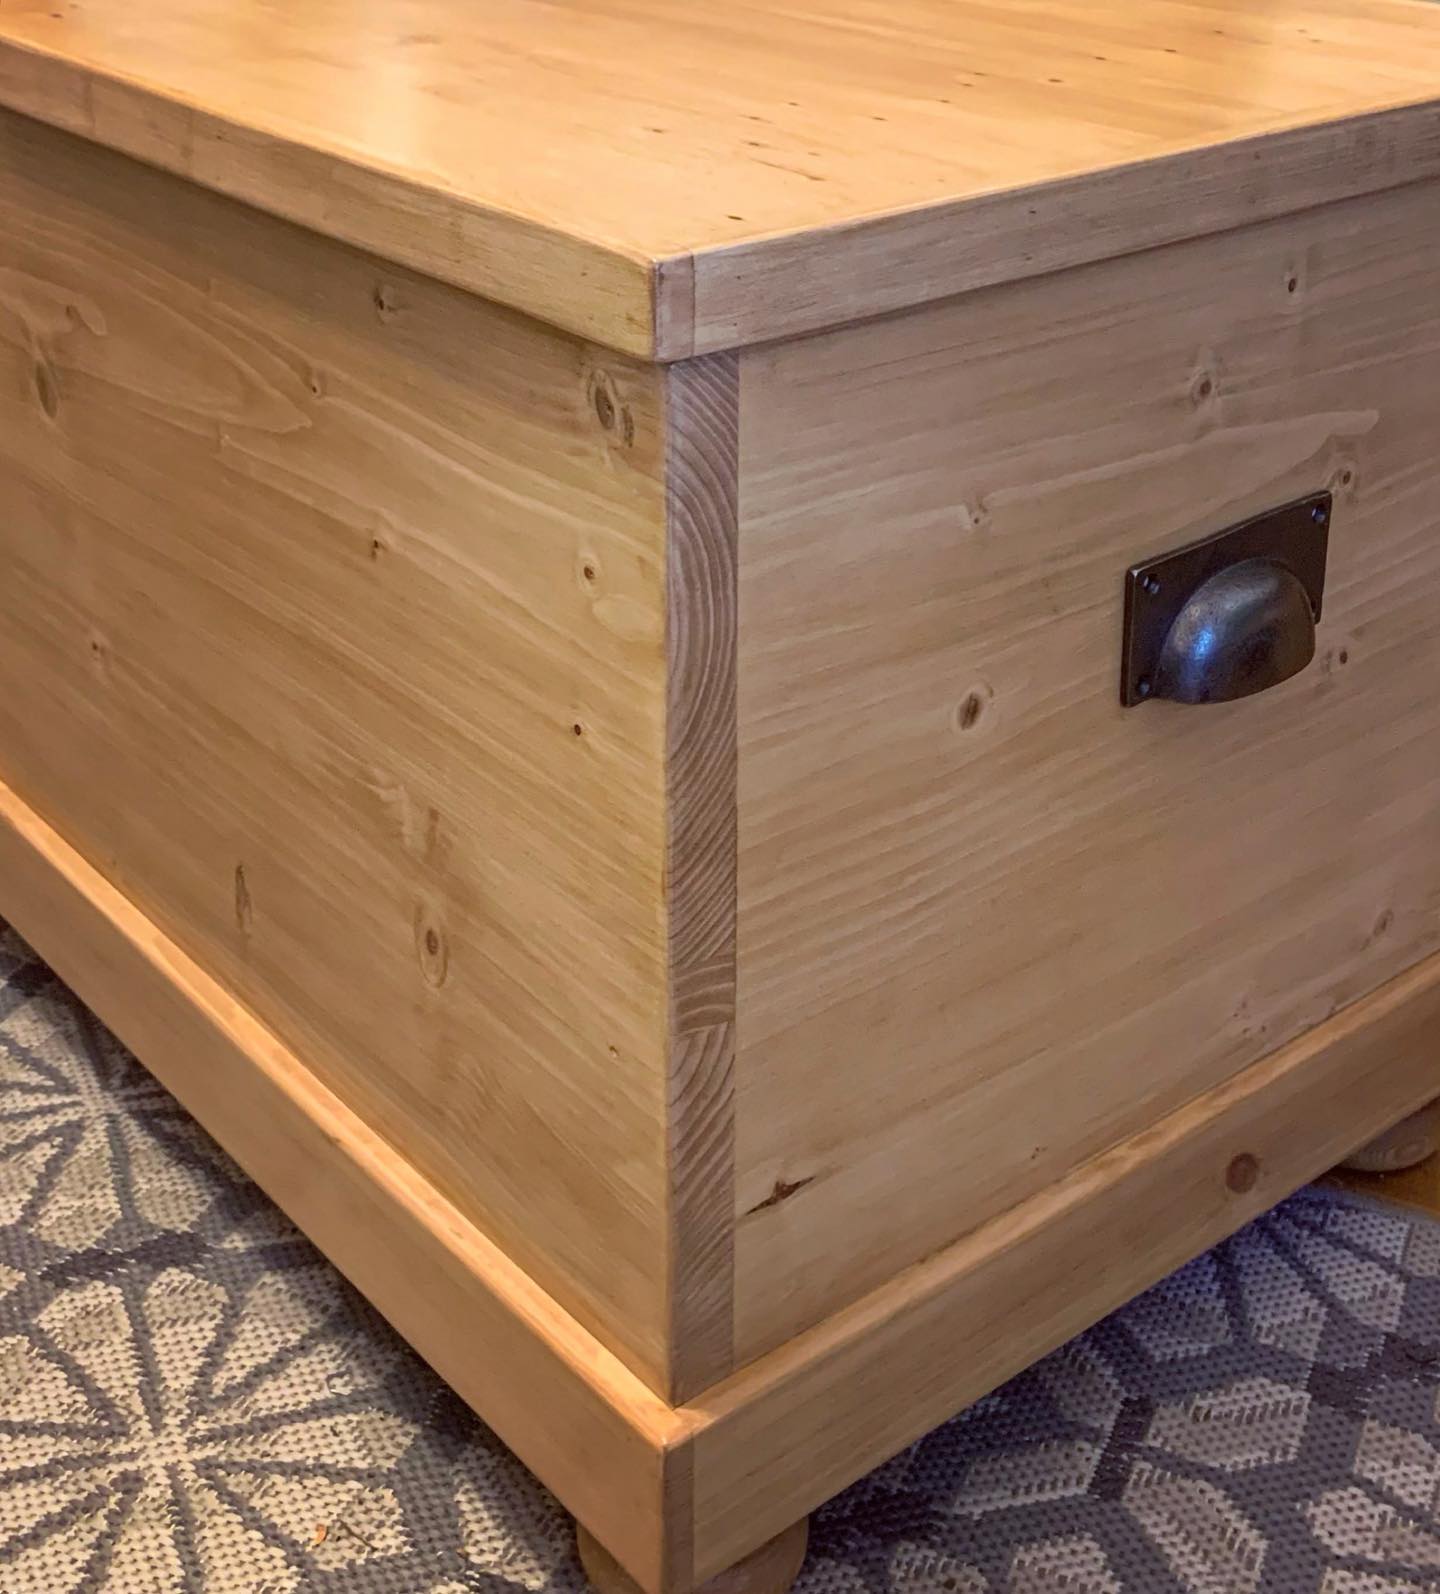 A little peek at a large storage trunk we’ve been working on. Made from reclaimed wood, it’s got some lovely character and is totally unique. Soon to be delivered to its forever home